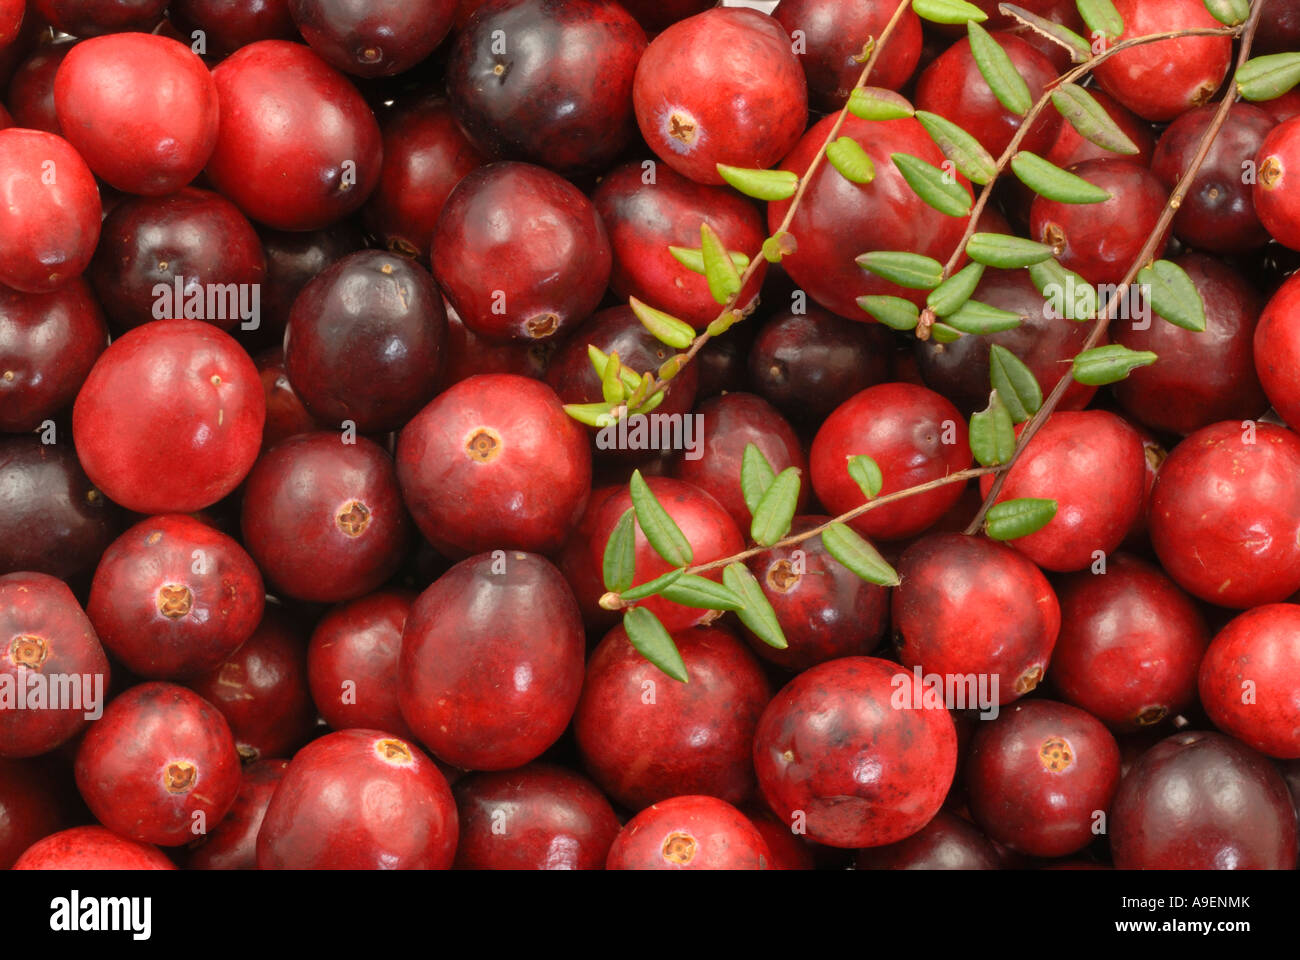 American Cranberry (Vaccinium macrocarpon, Oxycoccus macrocarpus), berries and twigs seen from above Stock Photo